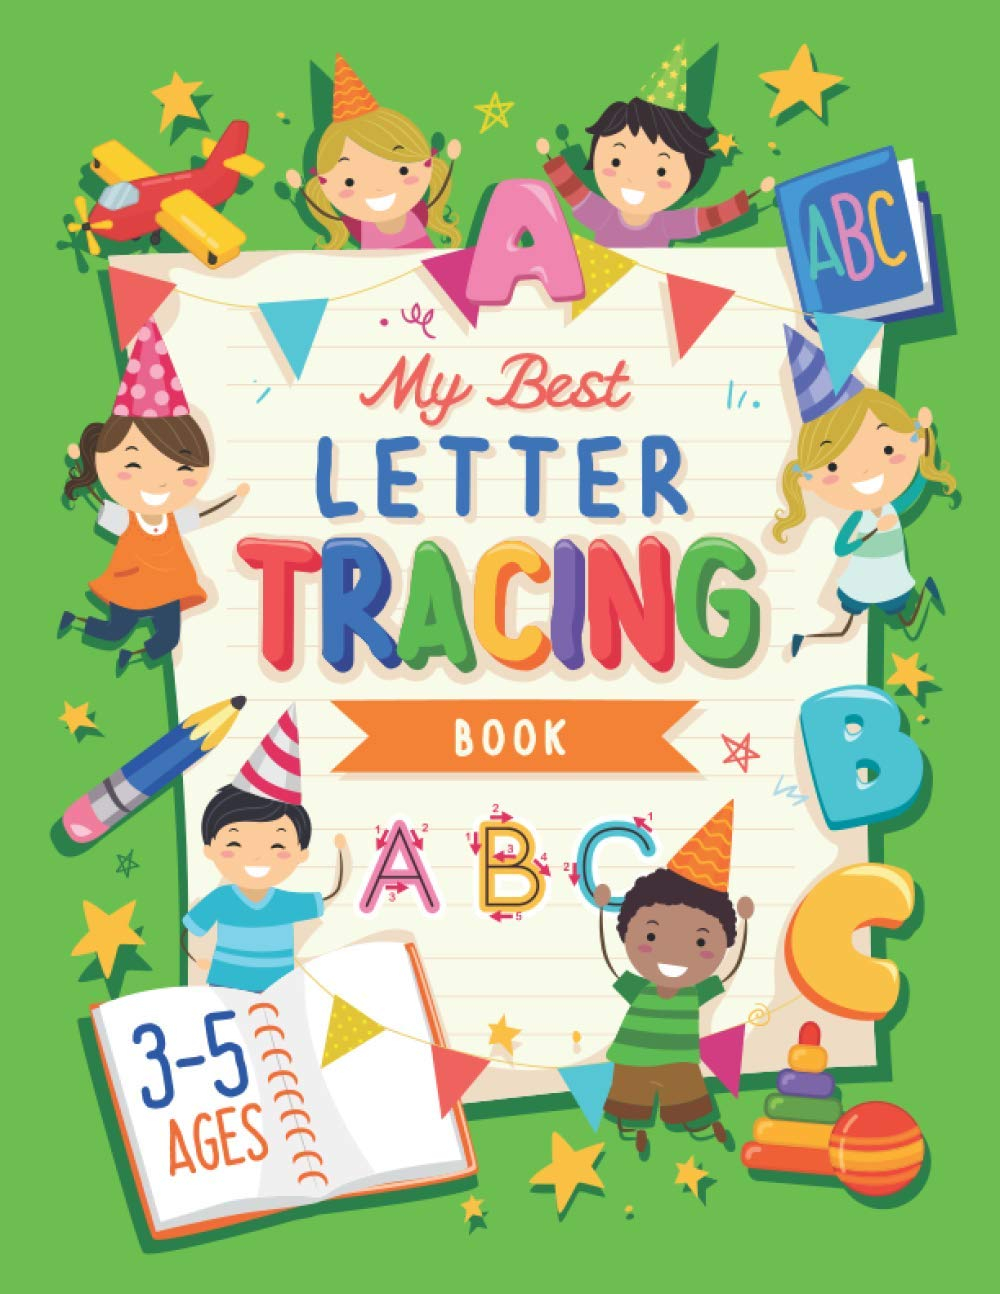 MY BEST LETTER TRACING BOOK Learning To Write For Preschoolers And